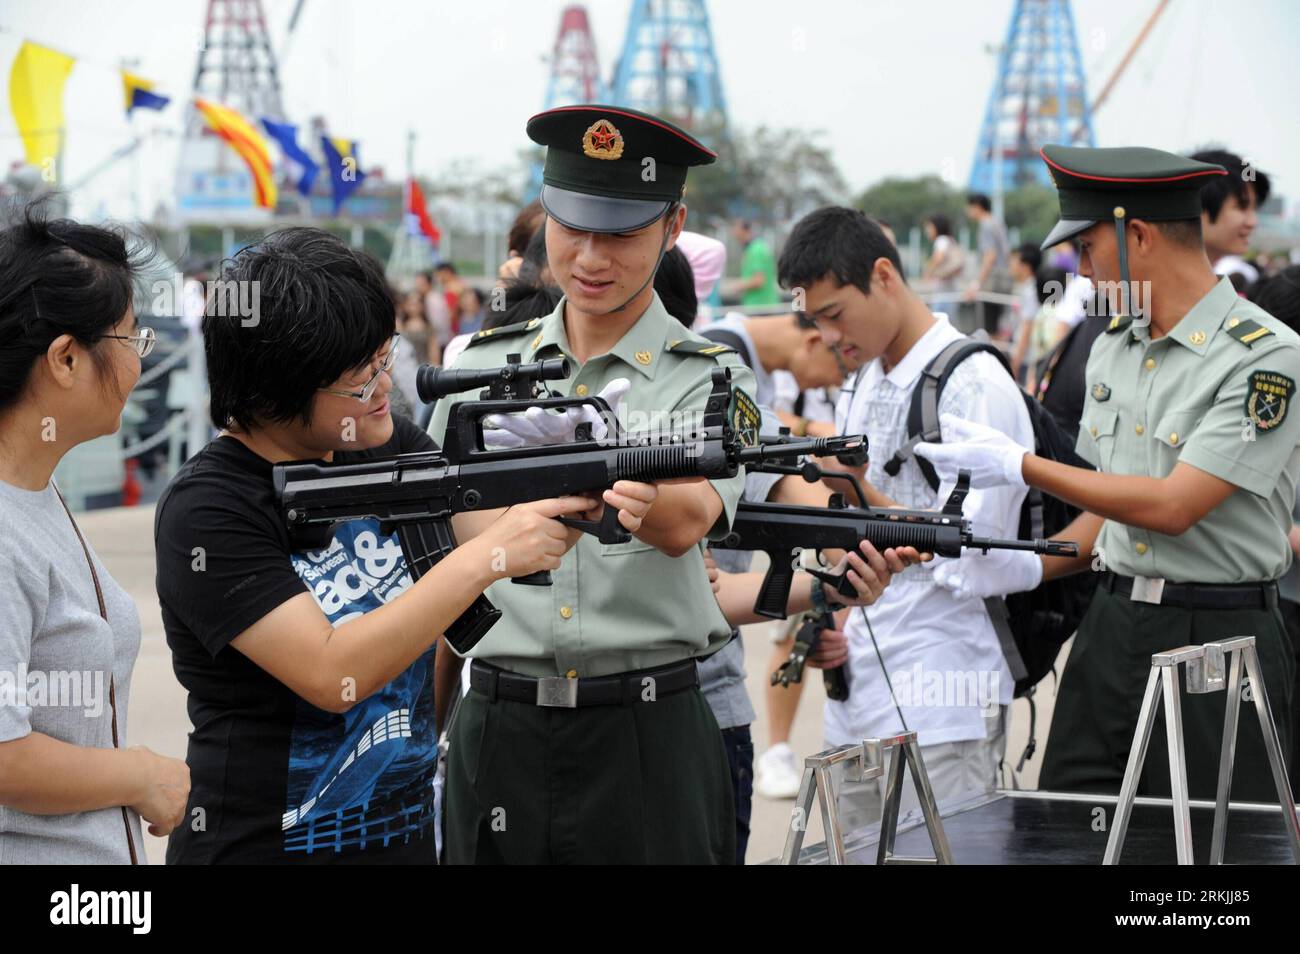 Bildnummer: 56139541  Datum: 01.10.2011  Copyright: imago/Xinhua (111001) -- HONG KONG, Oct. 1, 2011 (Xinhua) -- A citizen tries a rifle at a barrack of People s Liberation Army (PLA) Hong Kong Garrison in Hong Kong, south China, Oct. 1, 2011. A barrack of PLA Hong Kong Garrison was open to public on Saturday in celebration of the National Day, which attracted some 15,000 visitors. (Xinhua/Song Zhenping) (zhs) CHINA-HONG KONG-PLA-BARRACK-OPEN DAY (CN) PUBLICATIONxNOTxINxCHN Gesellschaft Militär Tag der offenen Tür China Hong Kong xdp x0x 2011 quer     56139541 Date 01 10 2011 Copyright Imago X Stock Photo